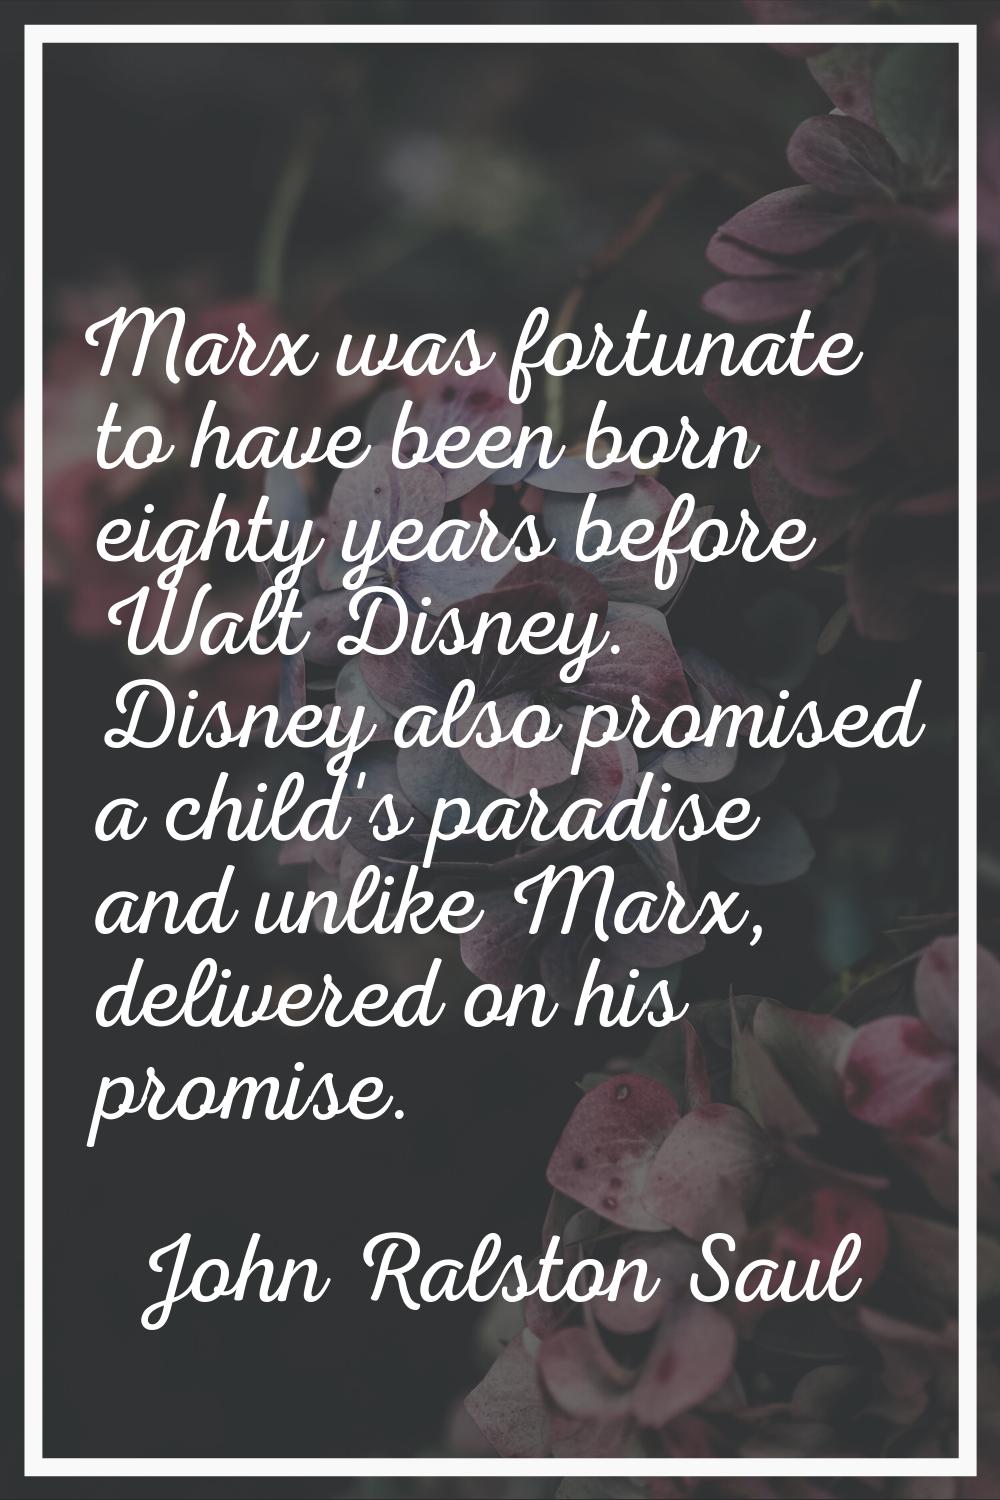 Marx was fortunate to have been born eighty years before Walt Disney. Disney also promised a child'